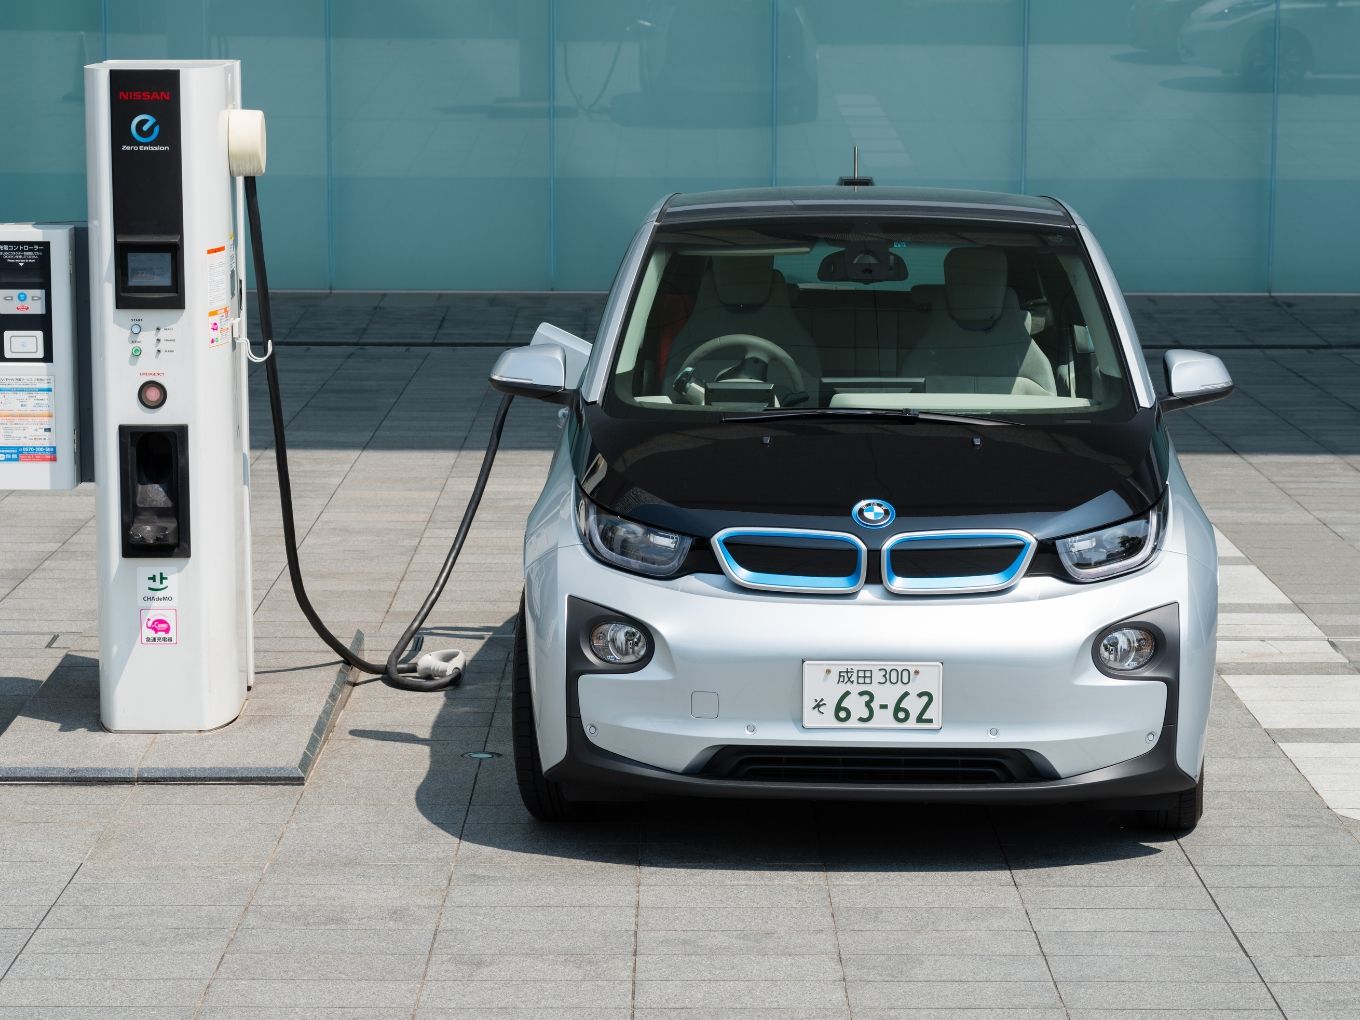 BMW is still considering taking launching Electric Vehicle in India as the infrastructure is still “ambiguous and uncertain” in the country.